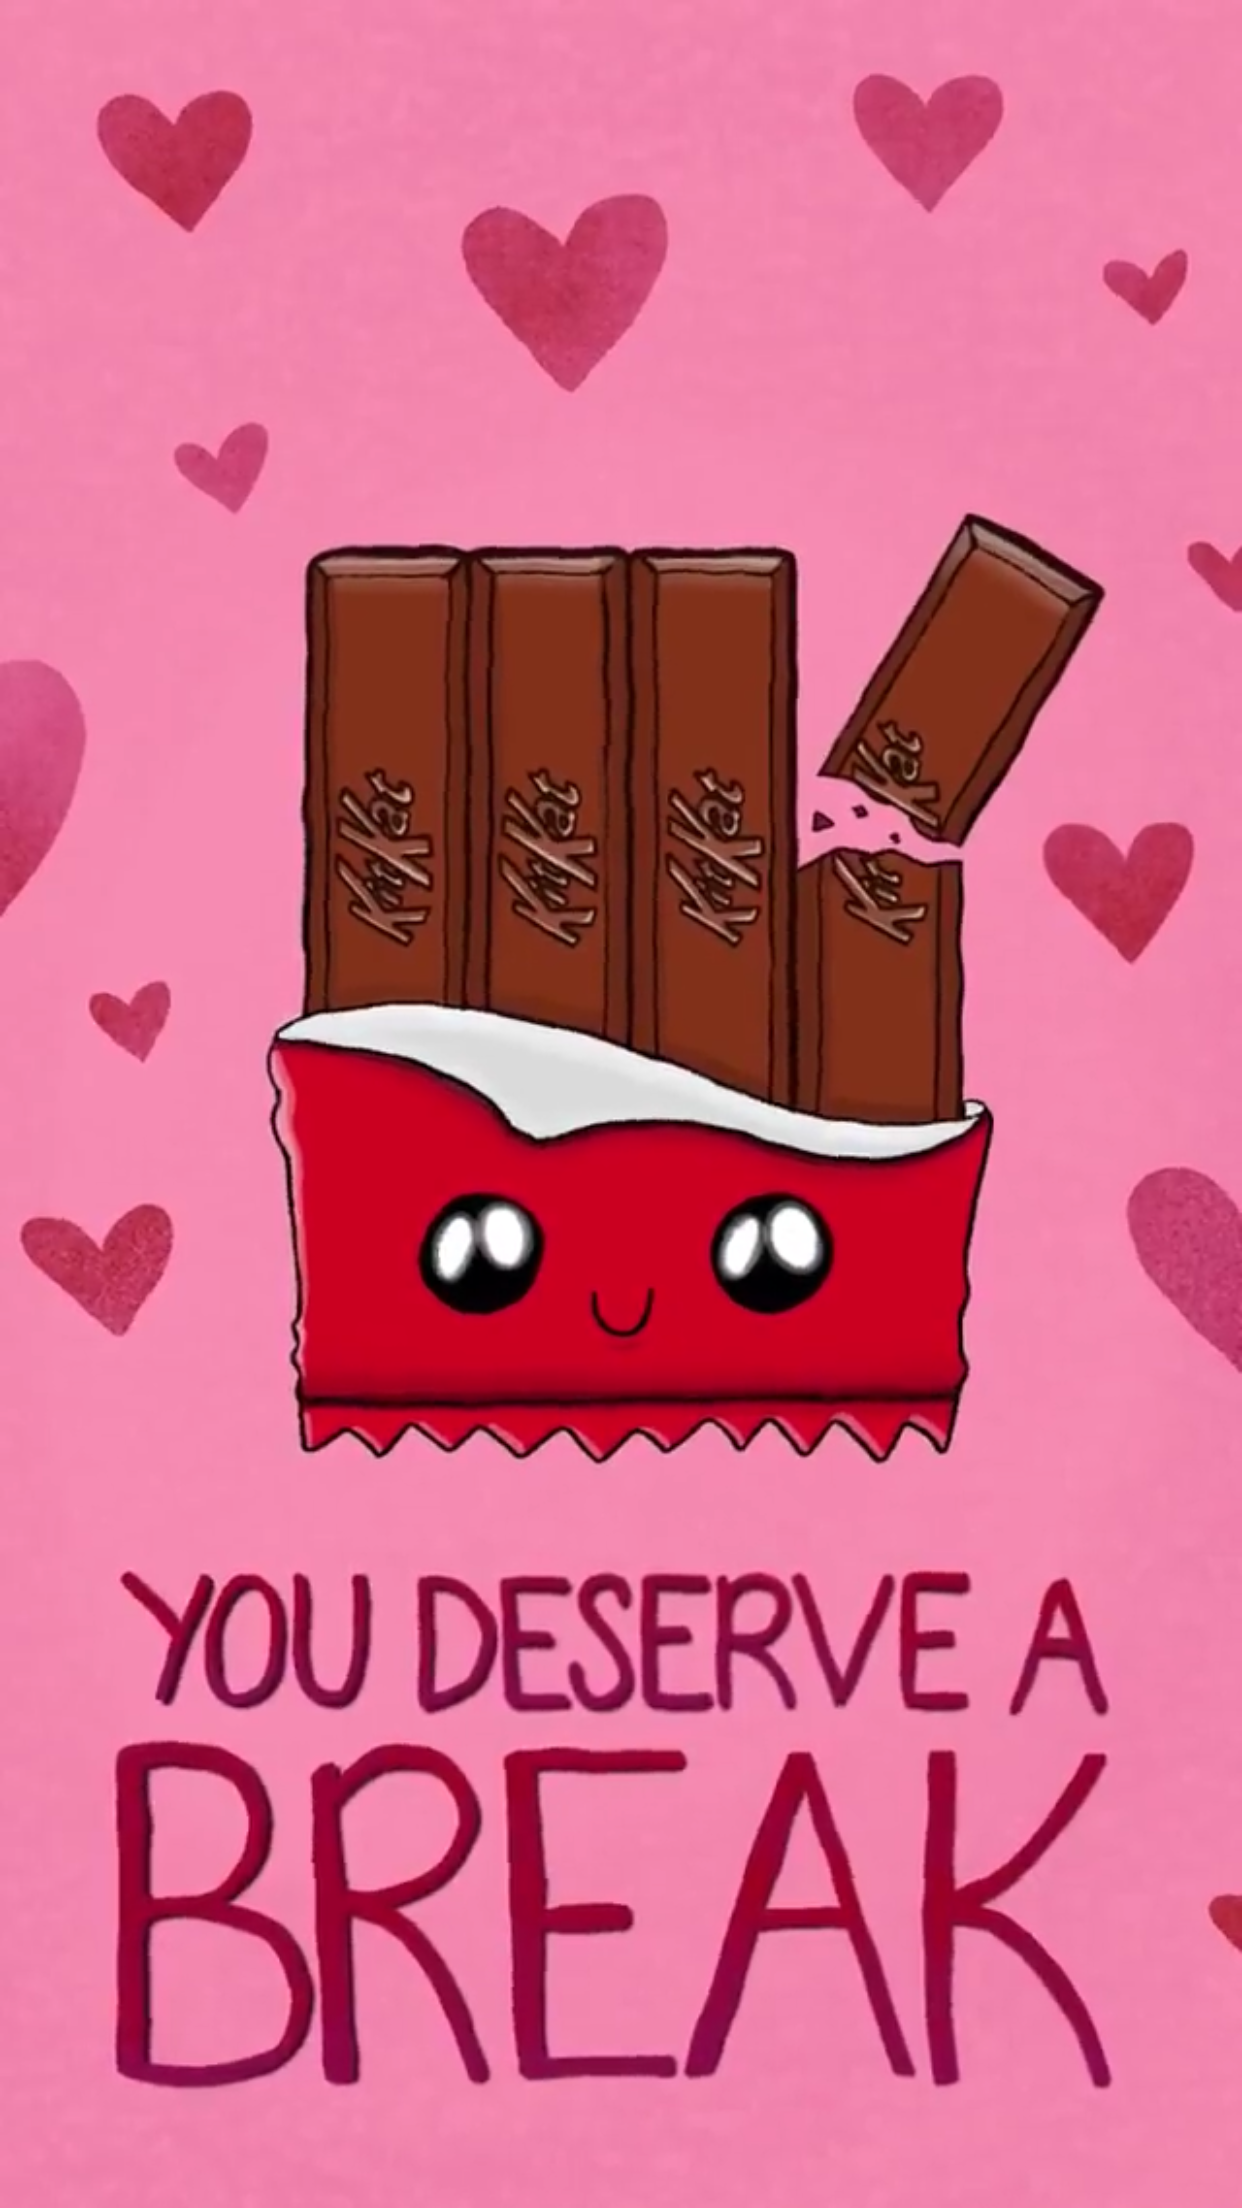 You deserve a break Kat Bar, candy bar food pun, lock screen wallpaper background for android cellphone iPhone from. Cute jokes, Cute puns, Funny food memes